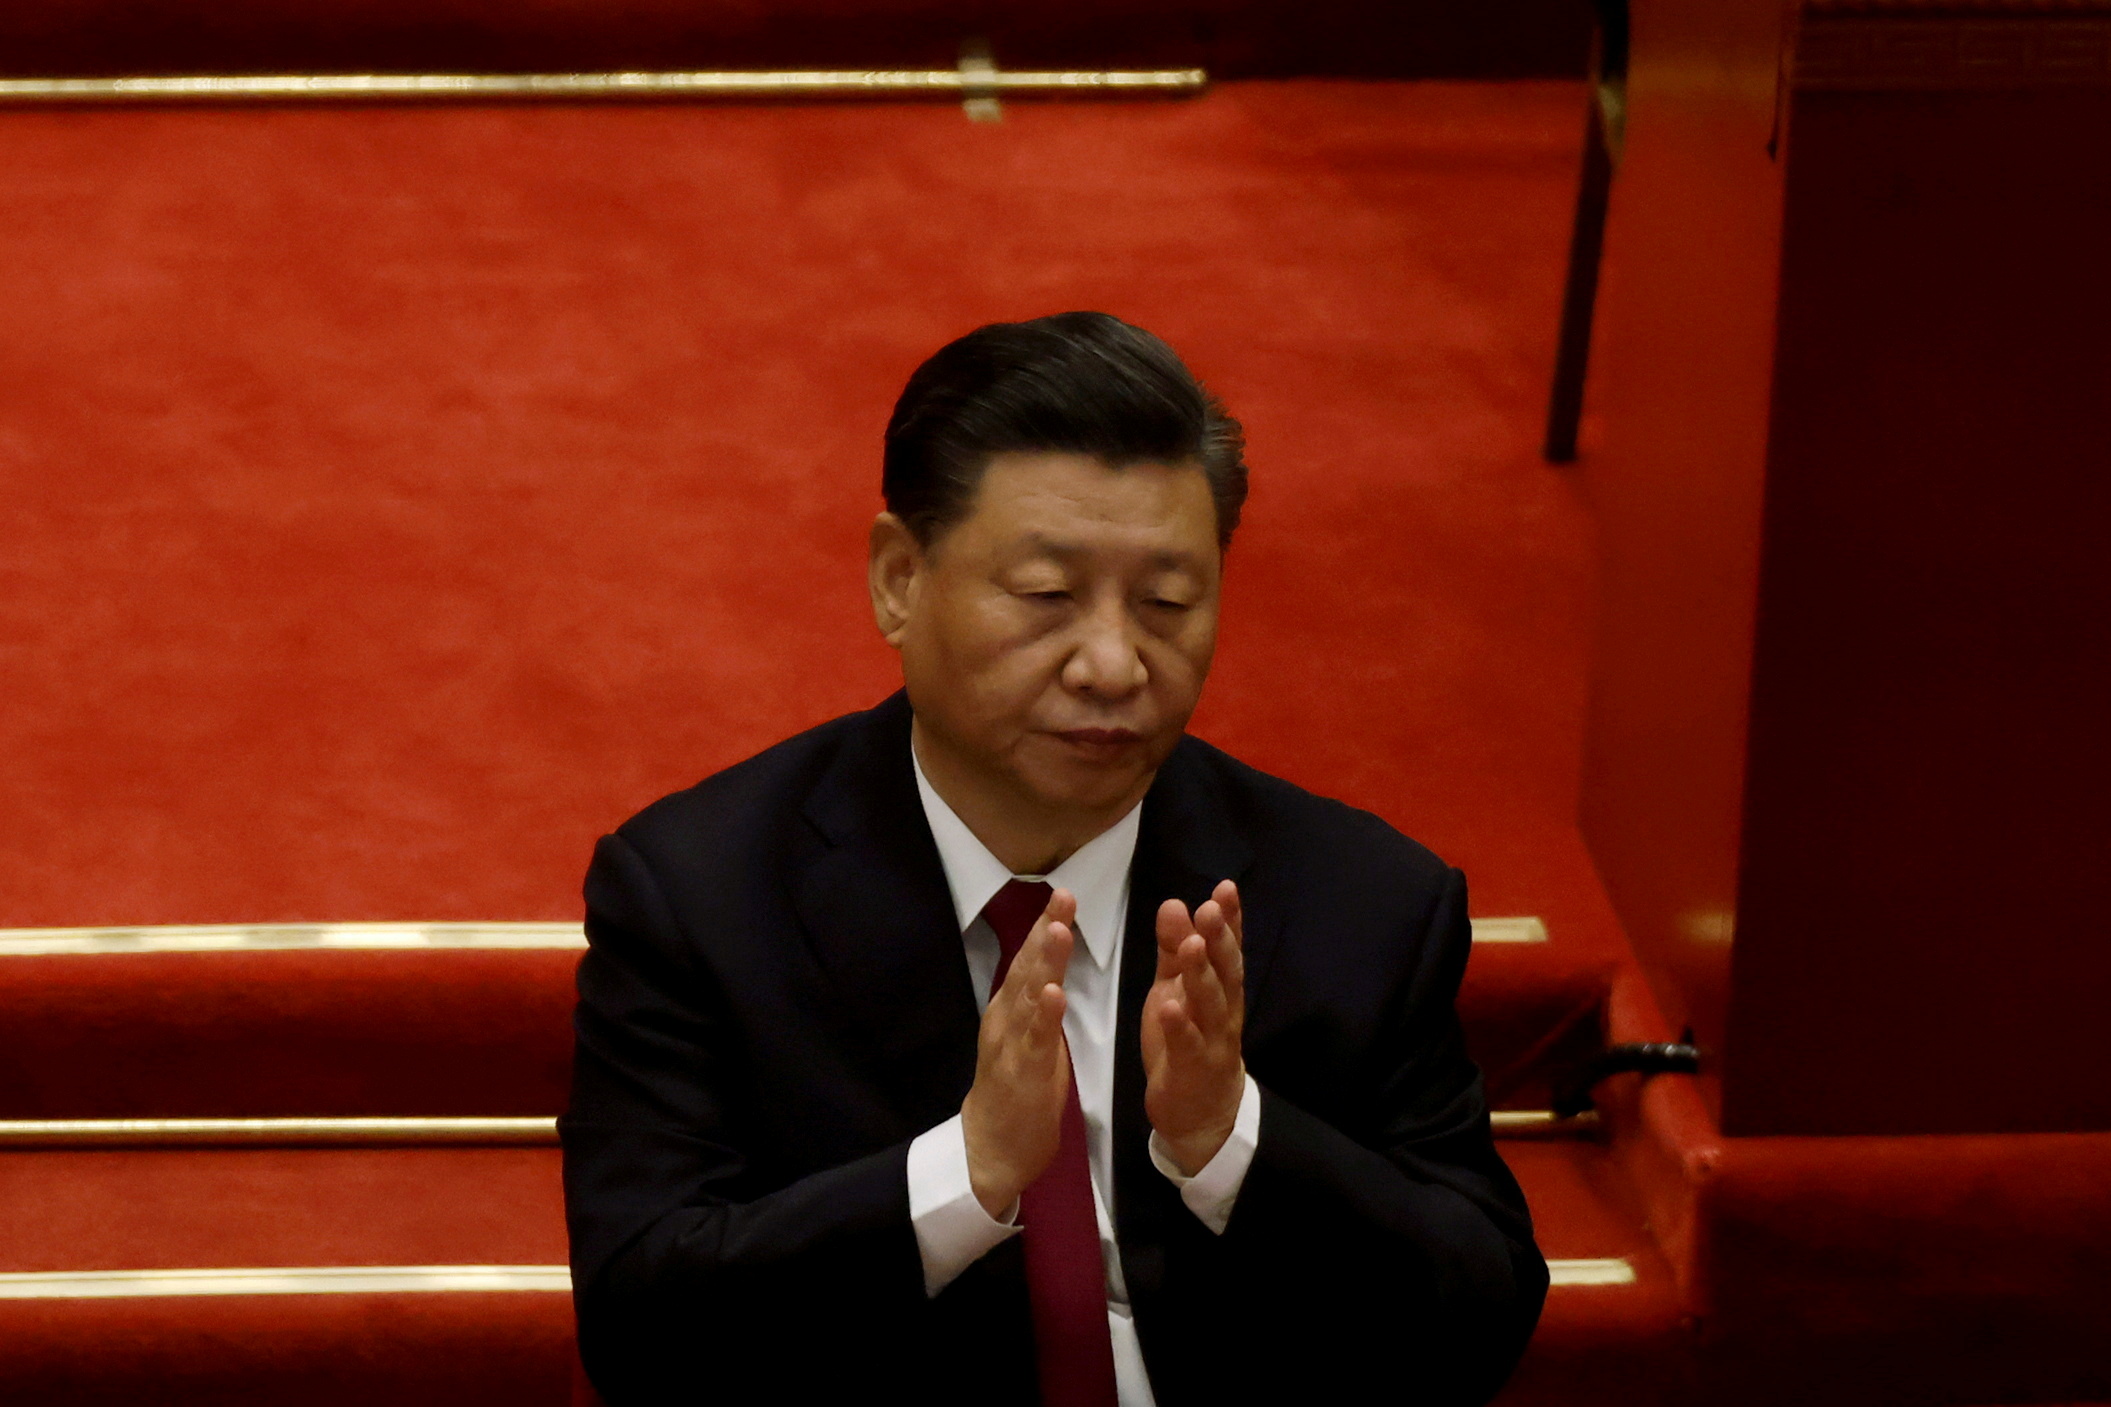 Chinese President Xi Jinping applauds at the opening session of the National People's Congress (NPC) at the Great Hall of the People in Beijing, China March 5, 2021